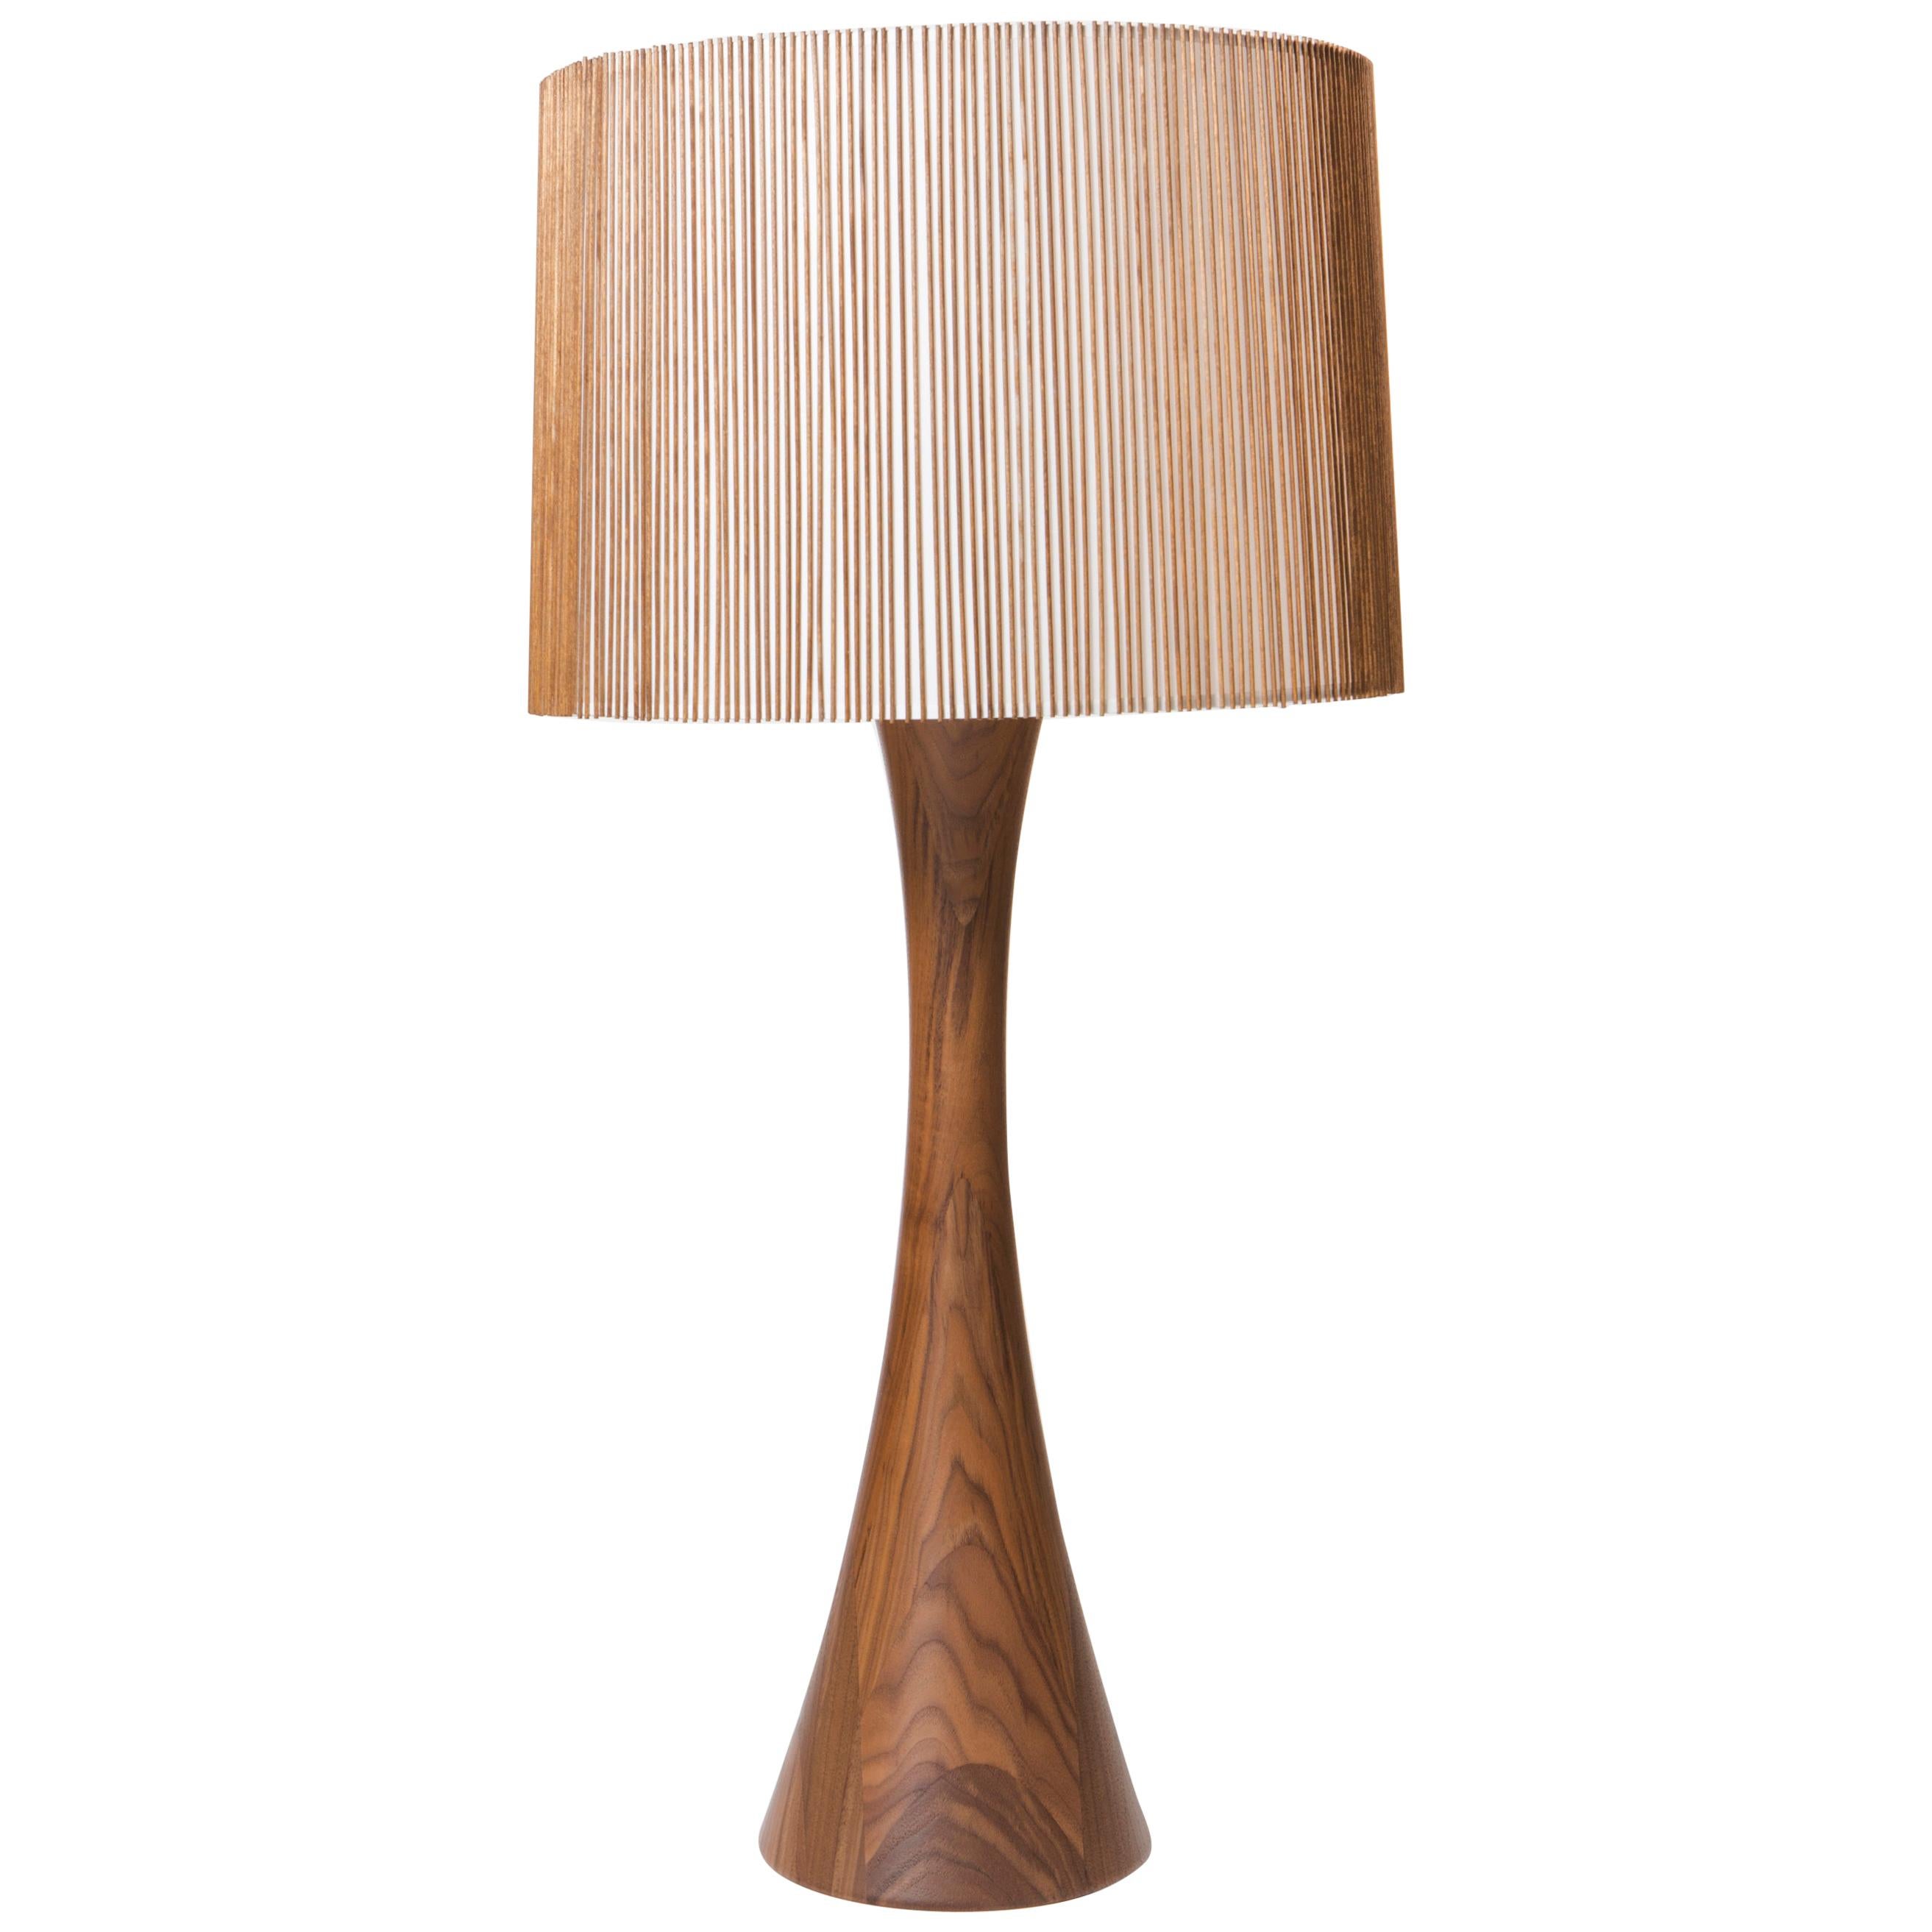 Walnut and Birch Hourglass Table Lamp by Mel Smilow